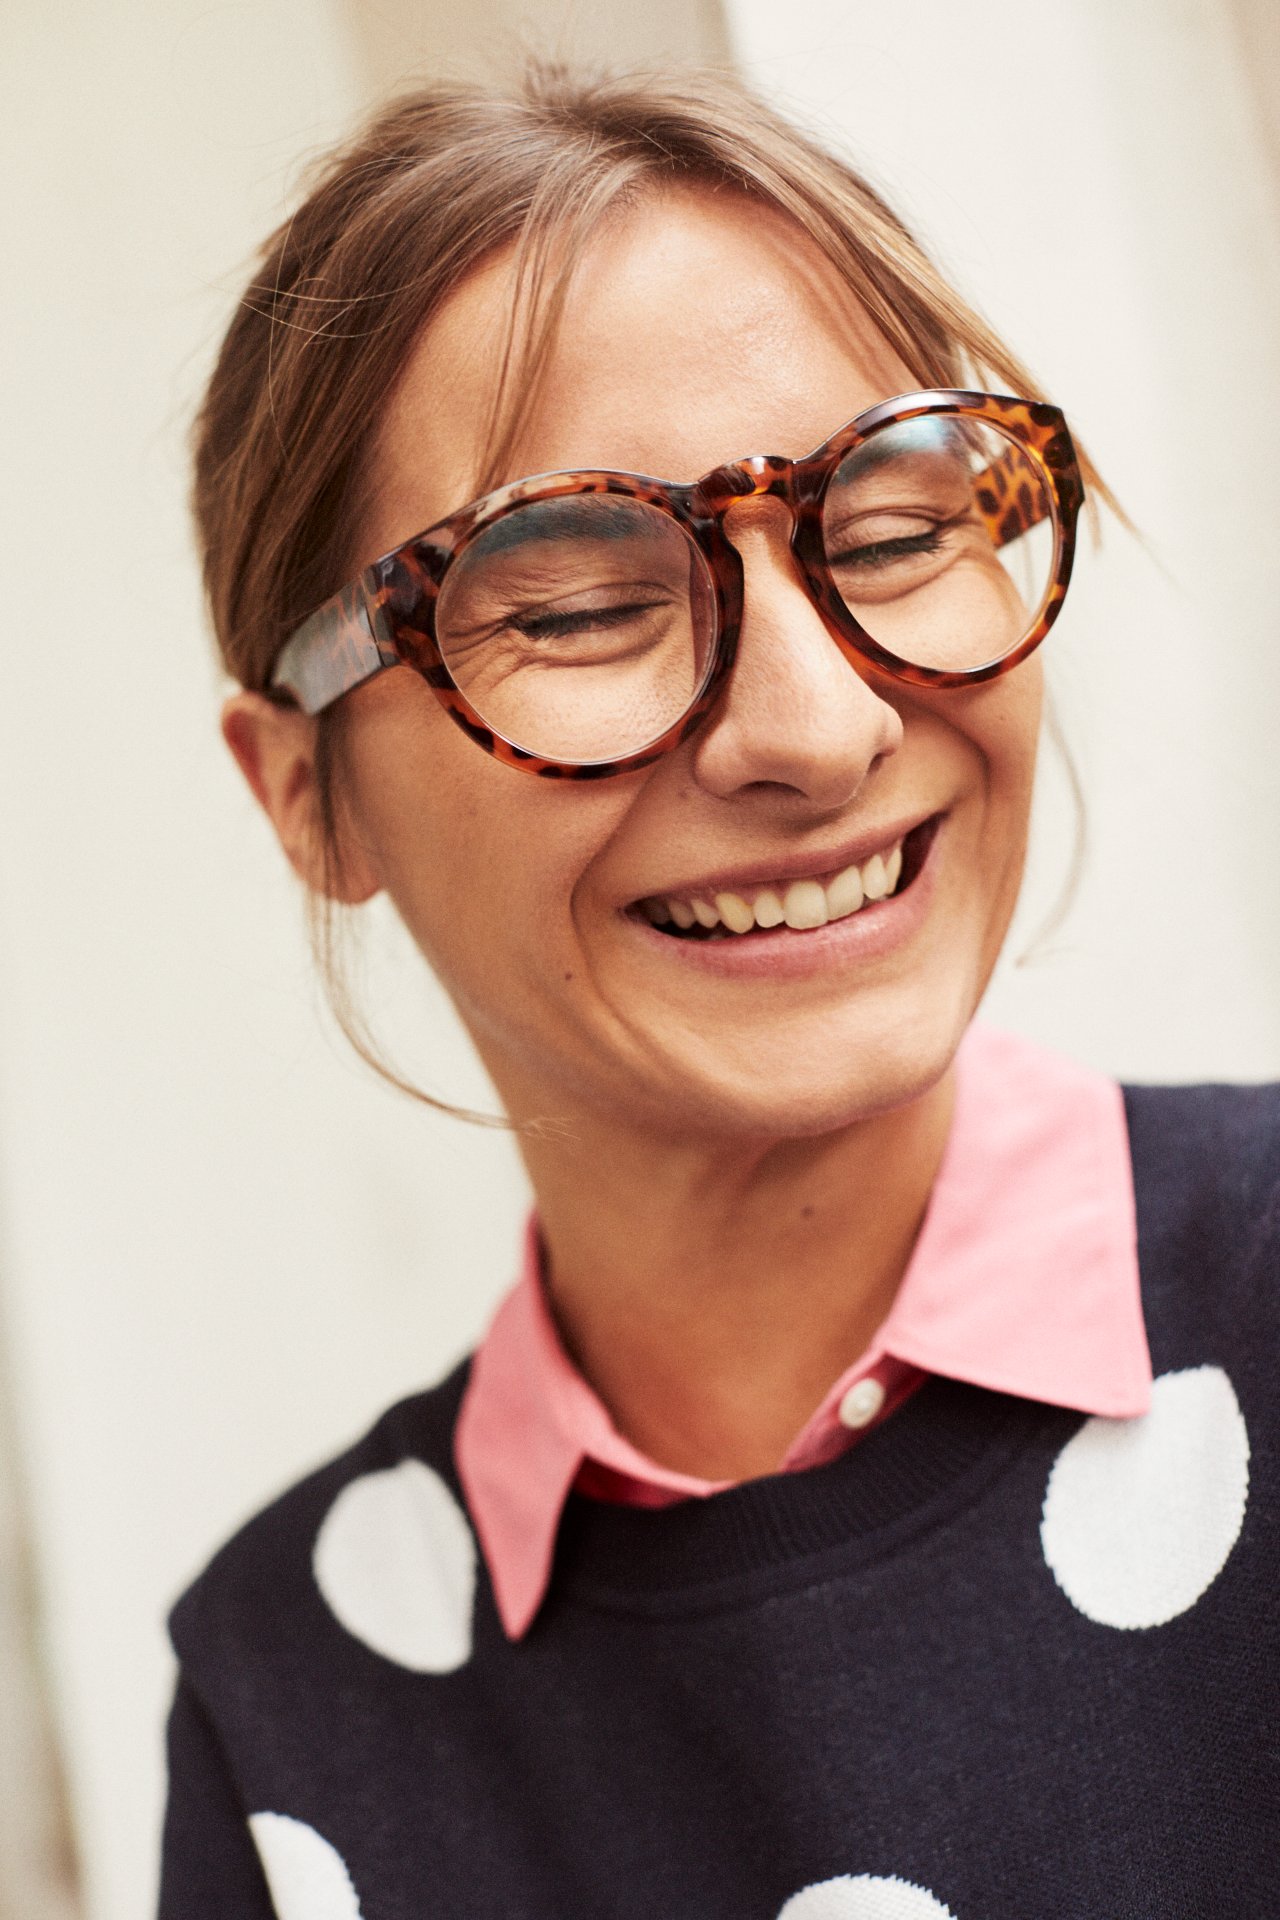 Gant (Womenswear) | Ulster Stores | The White House